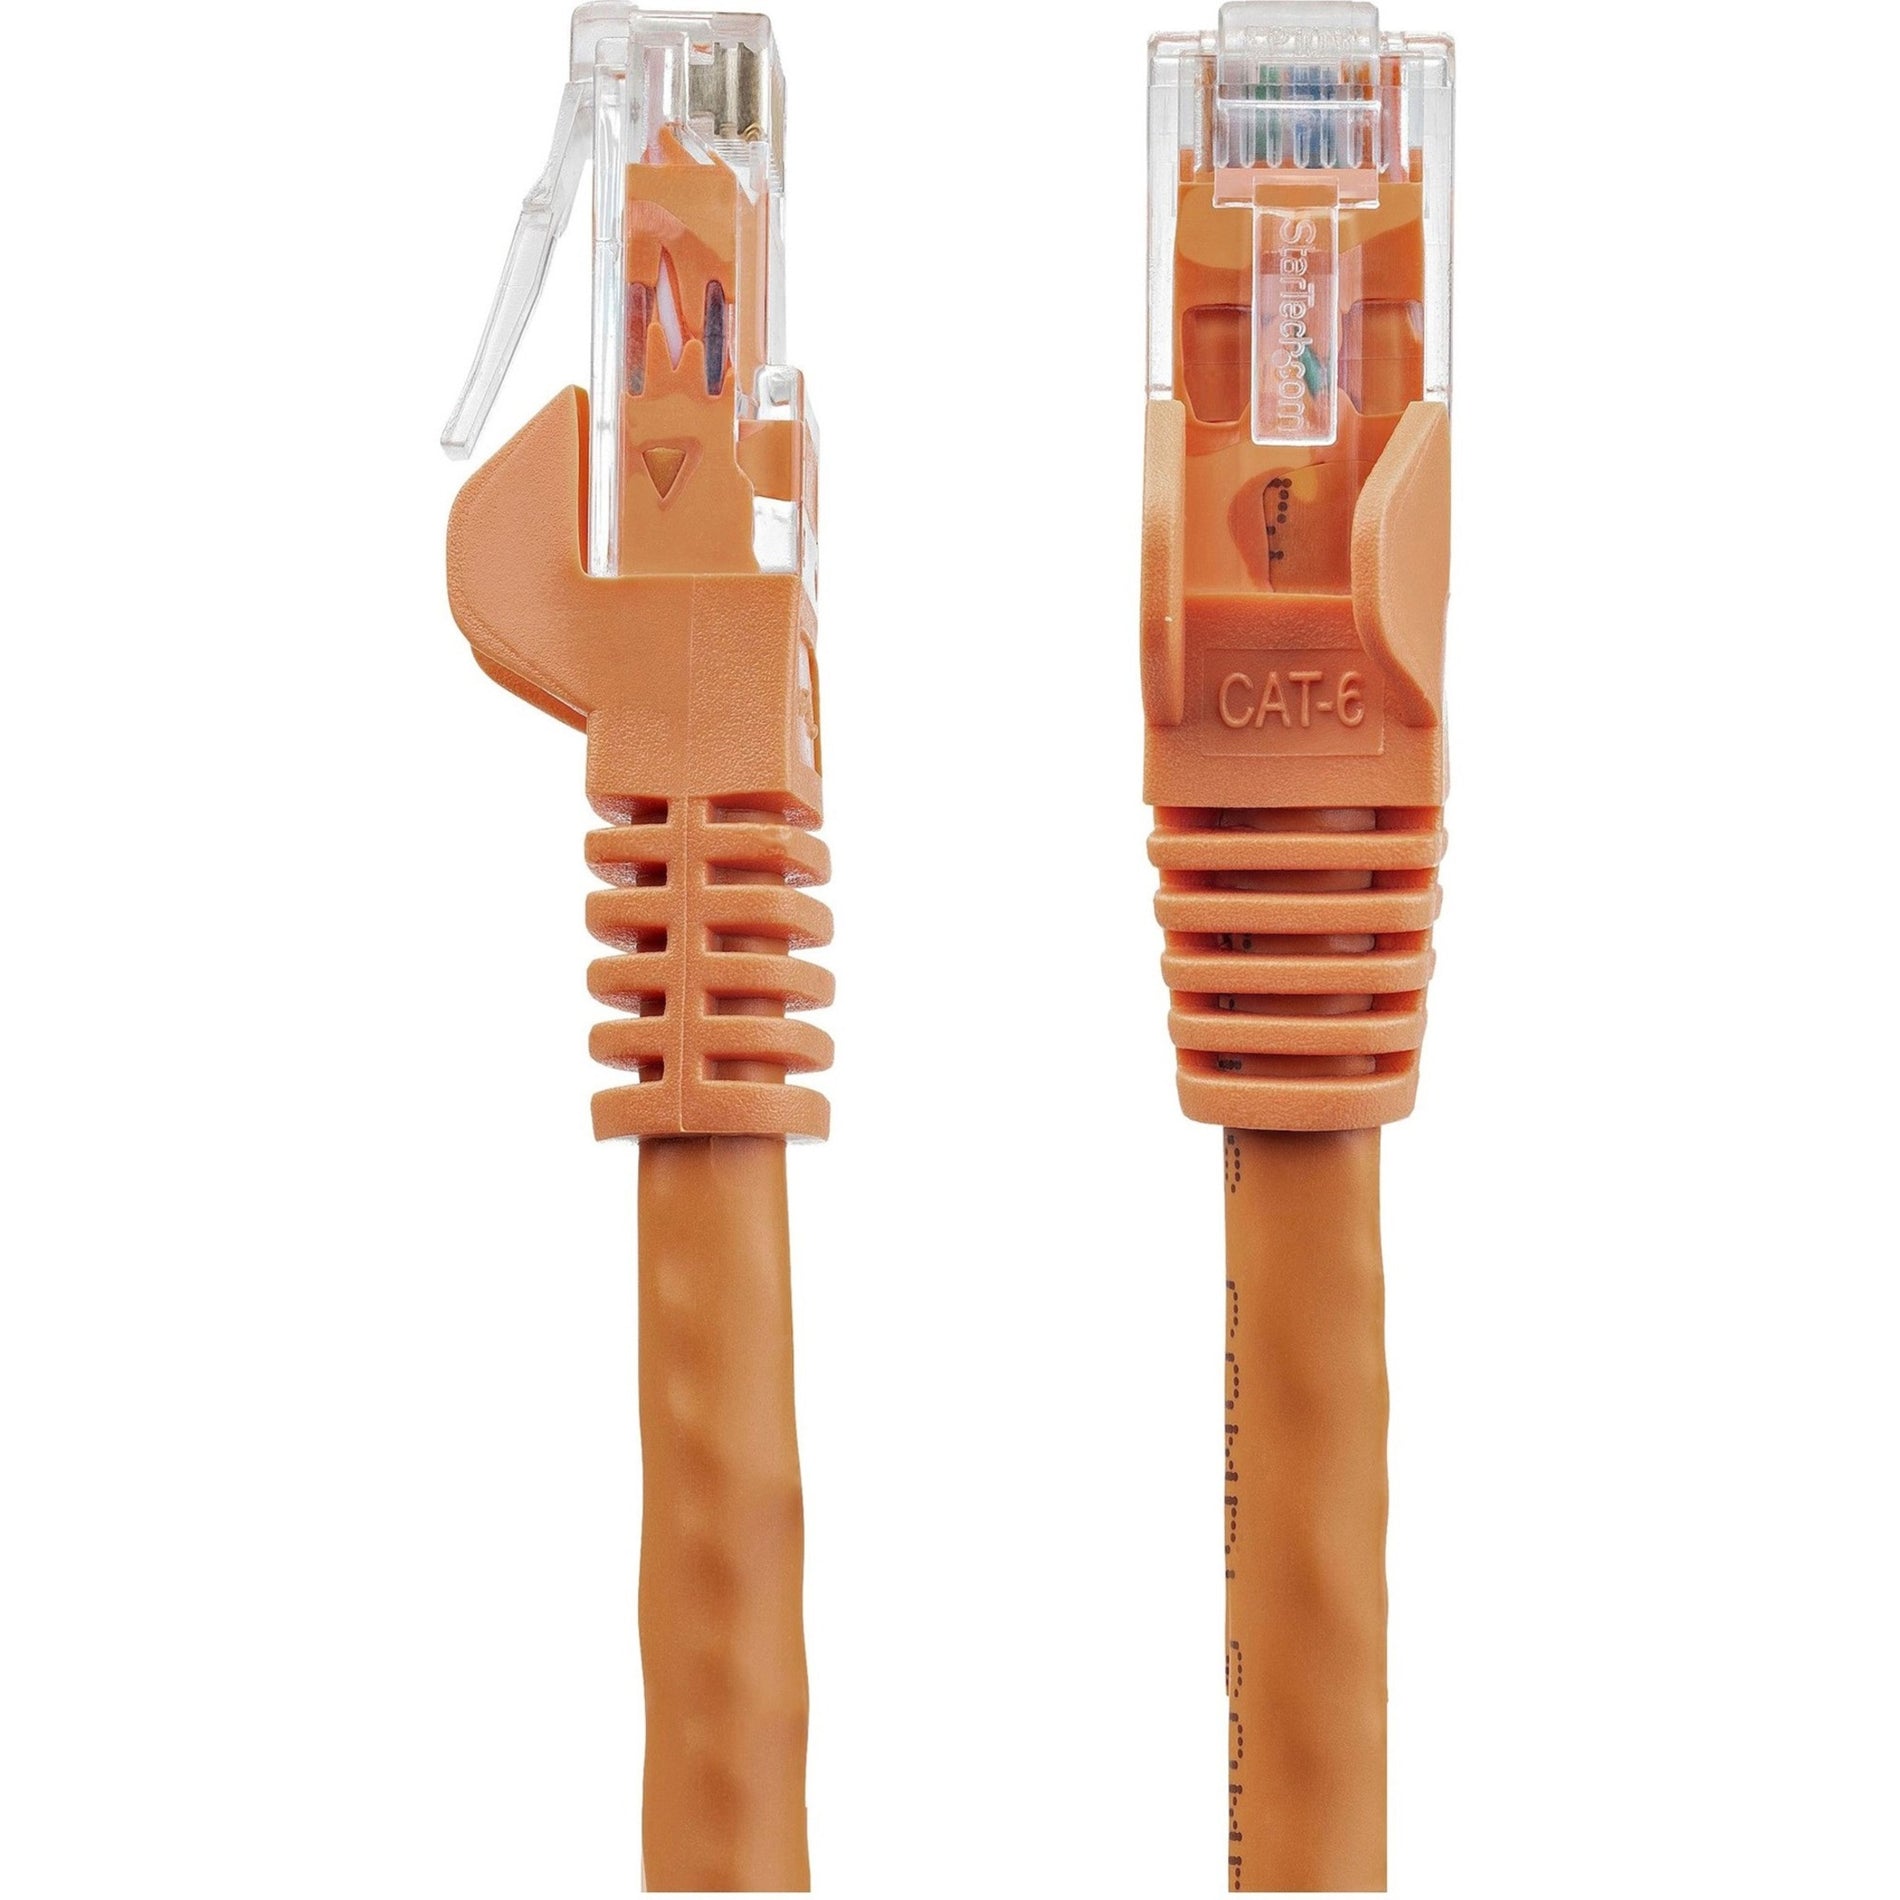 StarTech.com N6PATCH15OR 15 ft Orange Snagless Cat6 UTP Patch Cable, 10 Gbit/s Data Transfer Rate, Lifetime Warranty